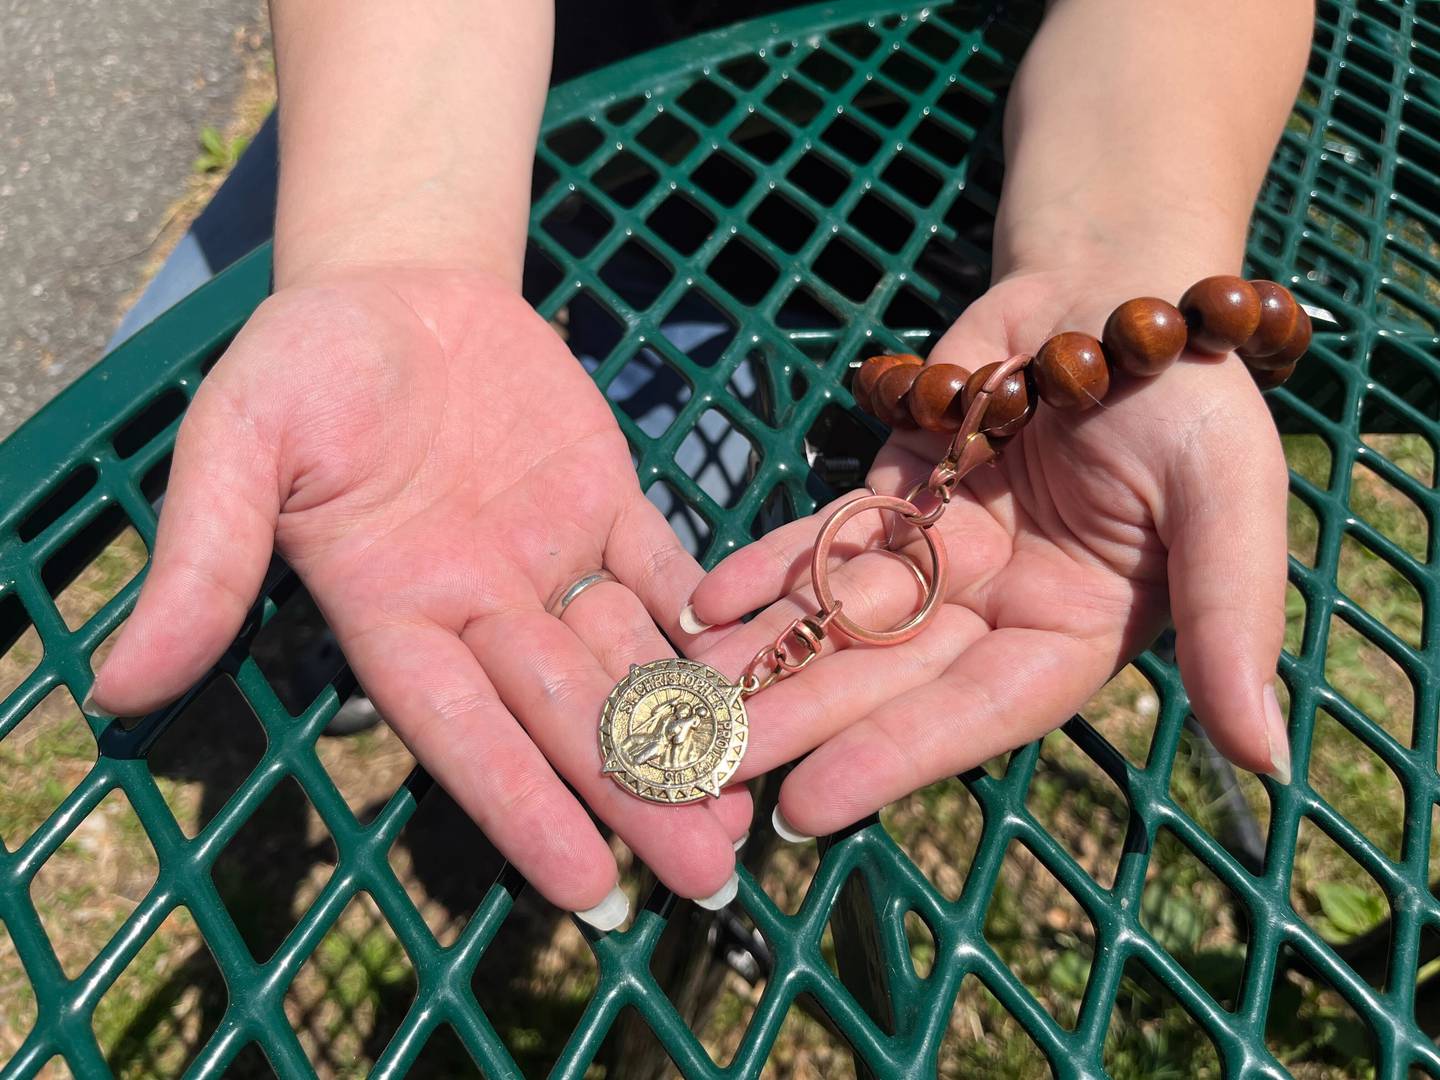 Ann Zelenka keeps a St. Christopher rosary bracelet with her often after a friend gave it to her when she was going through a tough time. Catholicism is a decision-making tool for her life, she said.